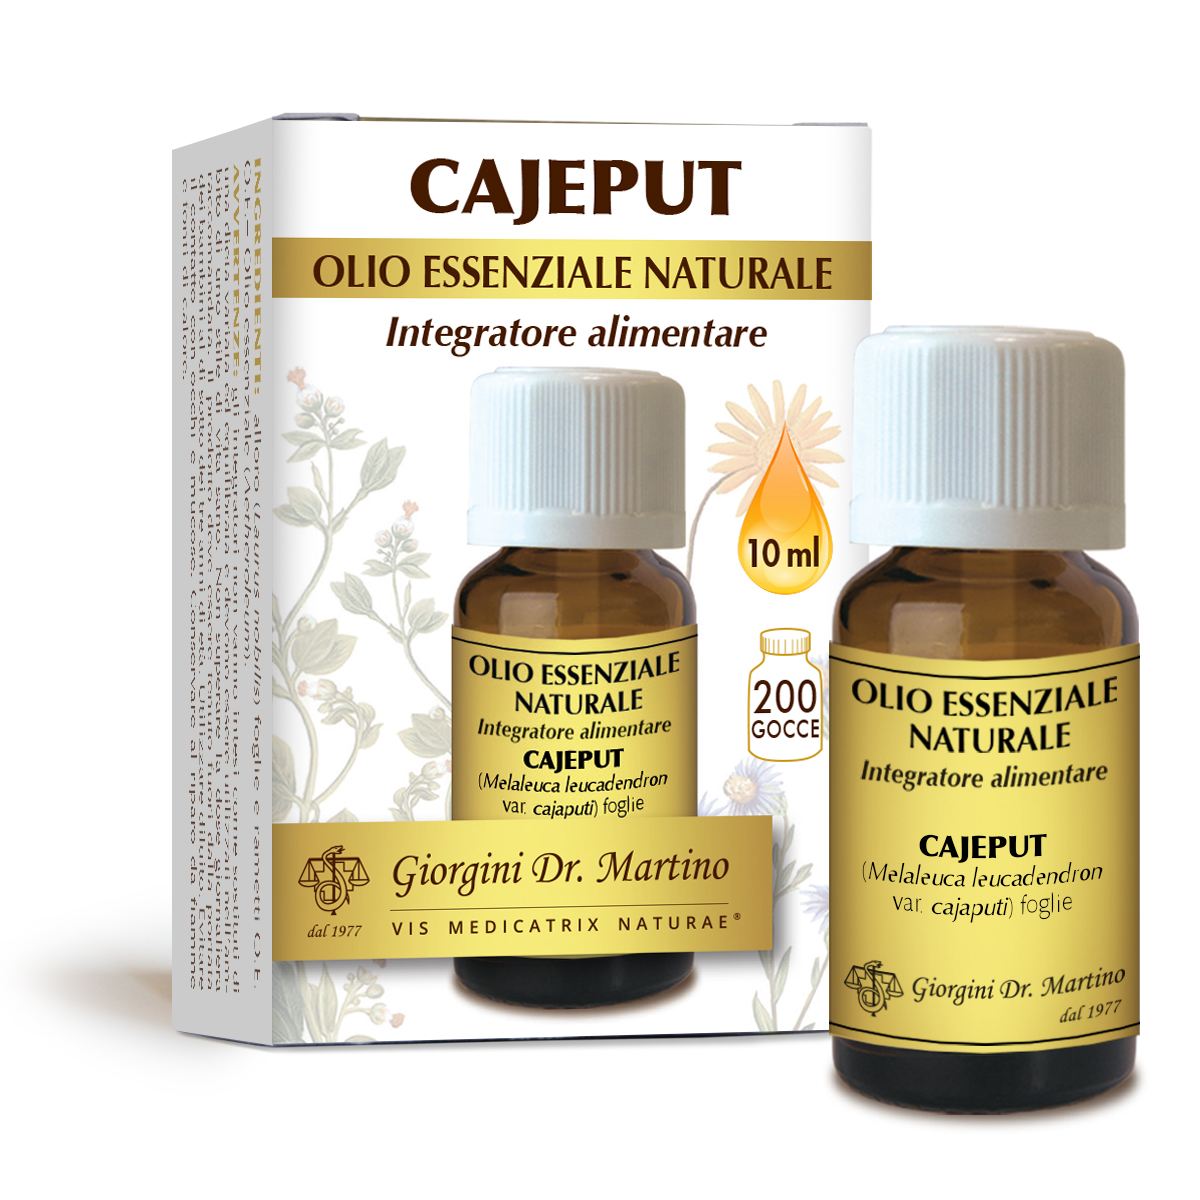 CAYEPUT aceite esencial natural 10 ml